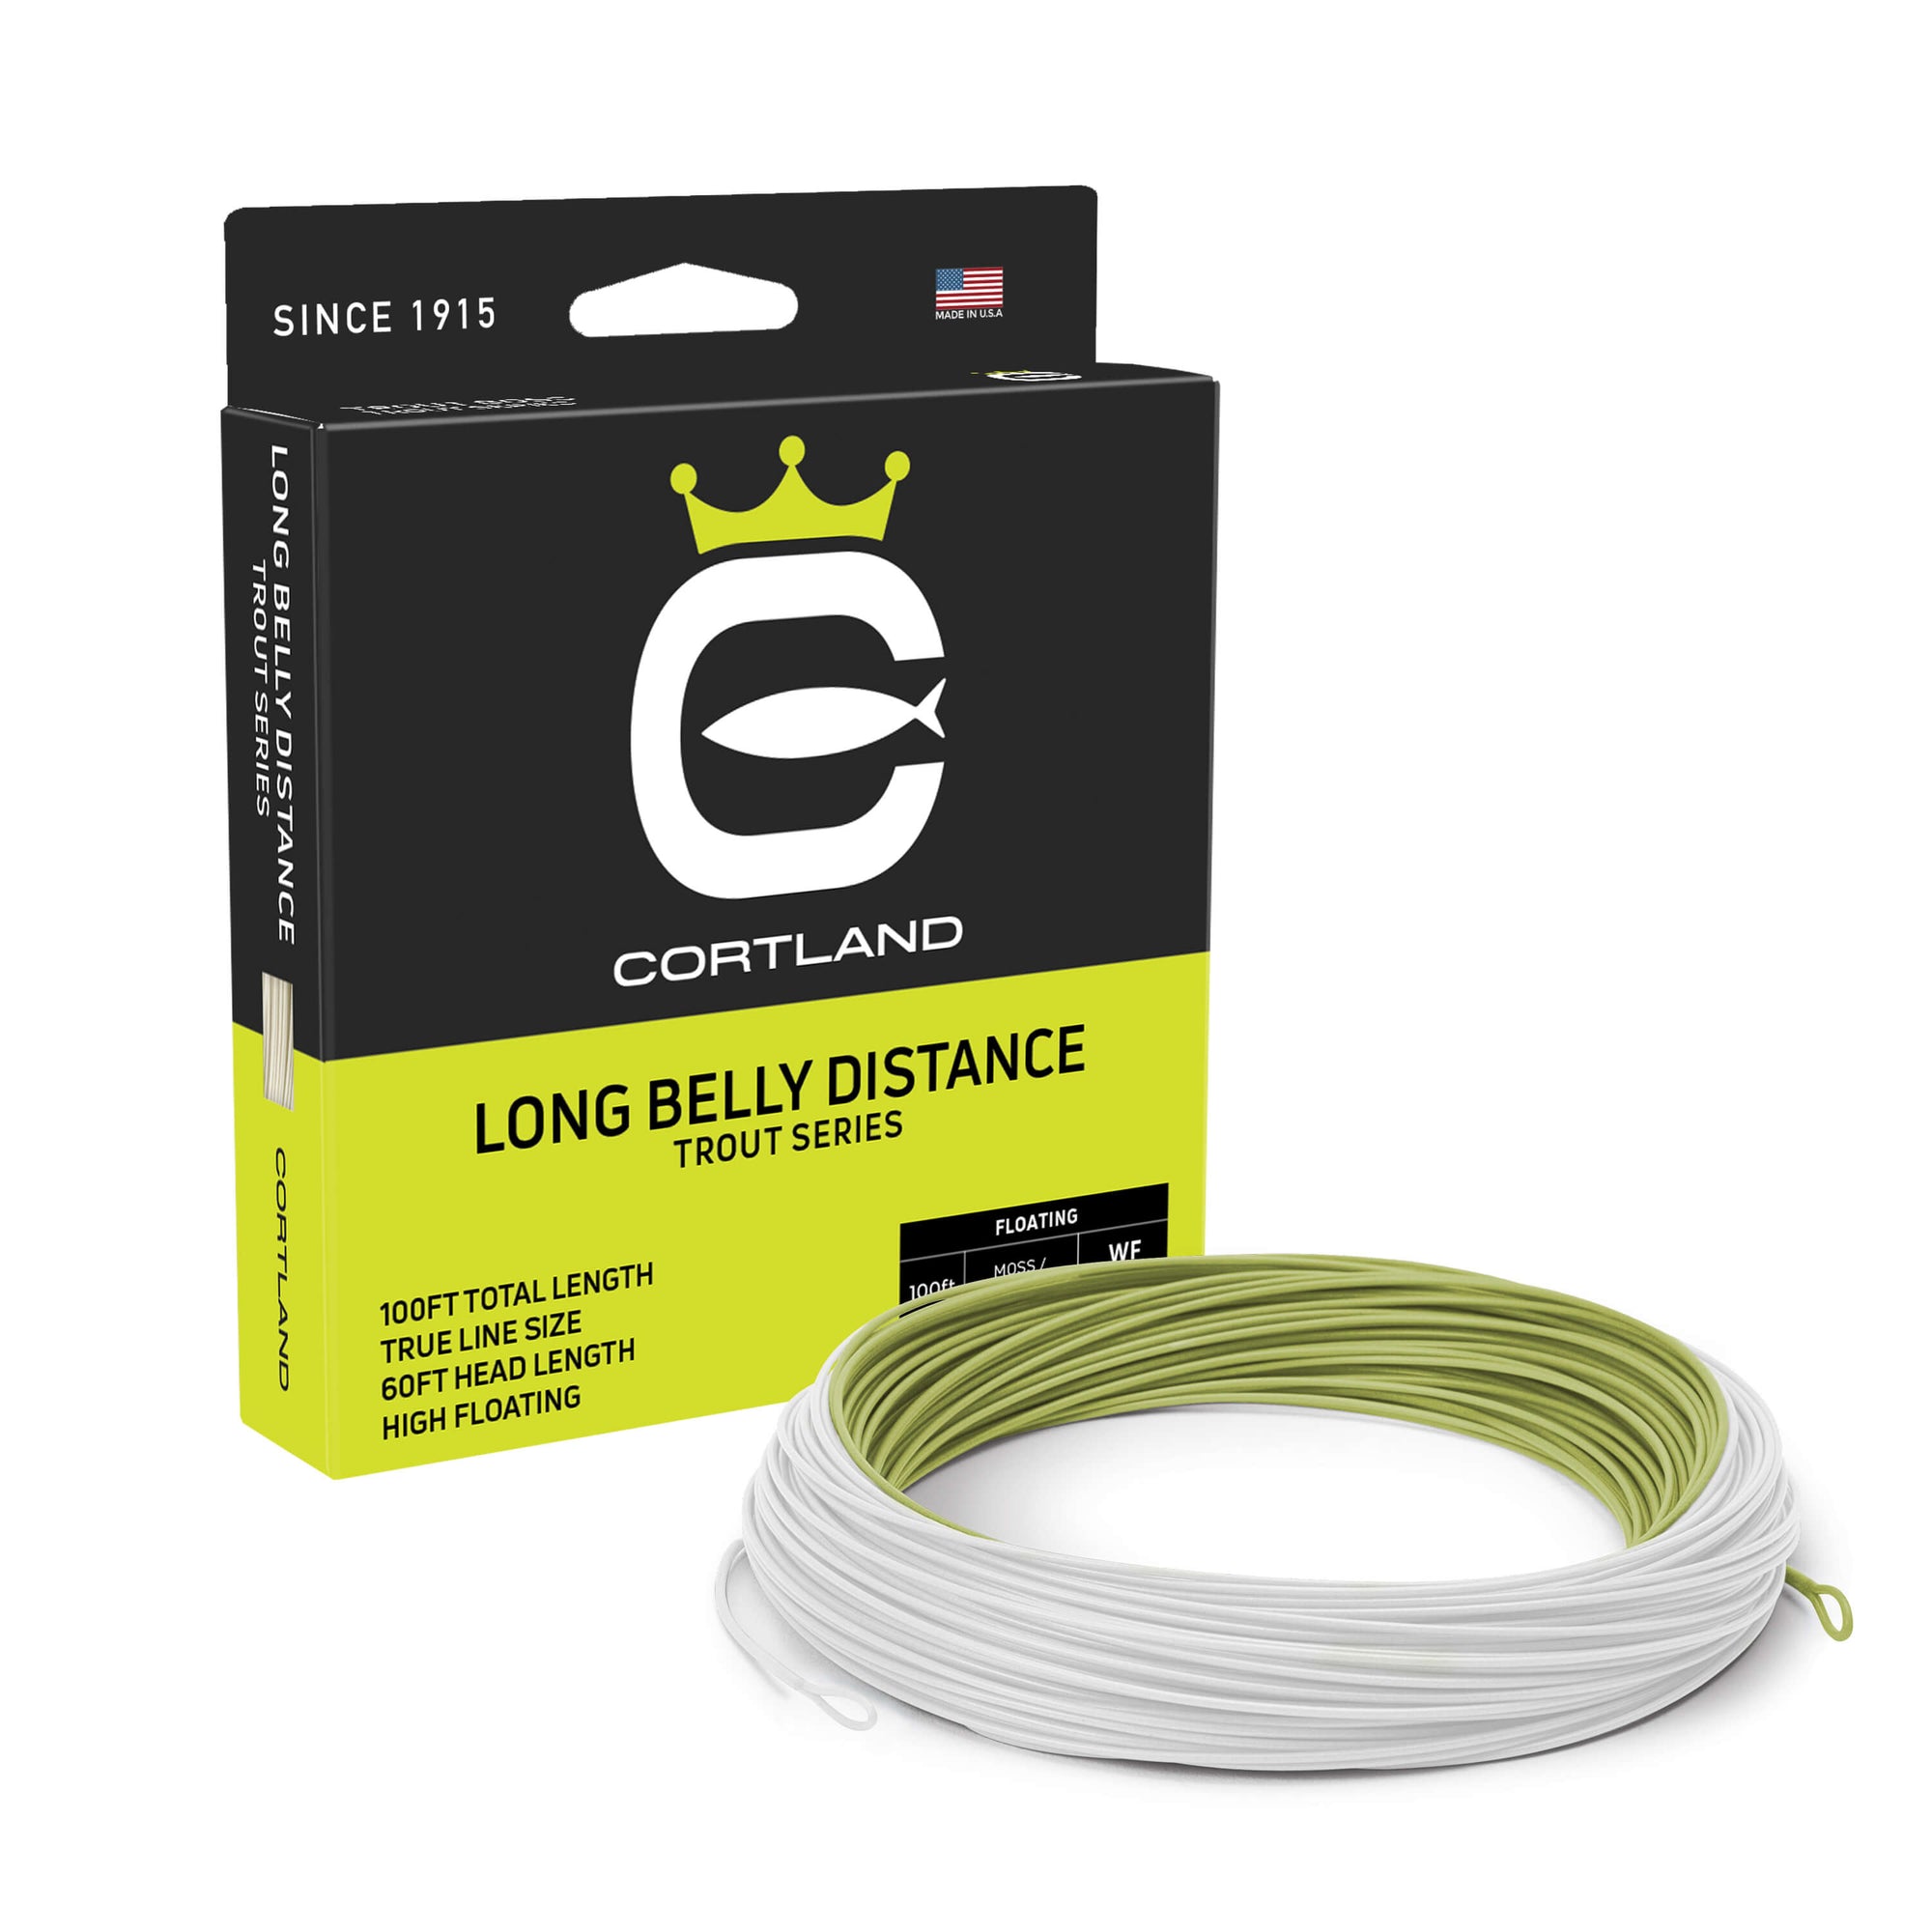 Long Belly Distance fly line box and coil. The color of the coil is moss green and white. The box has the Cortland Logo and is black and greenish yellow.